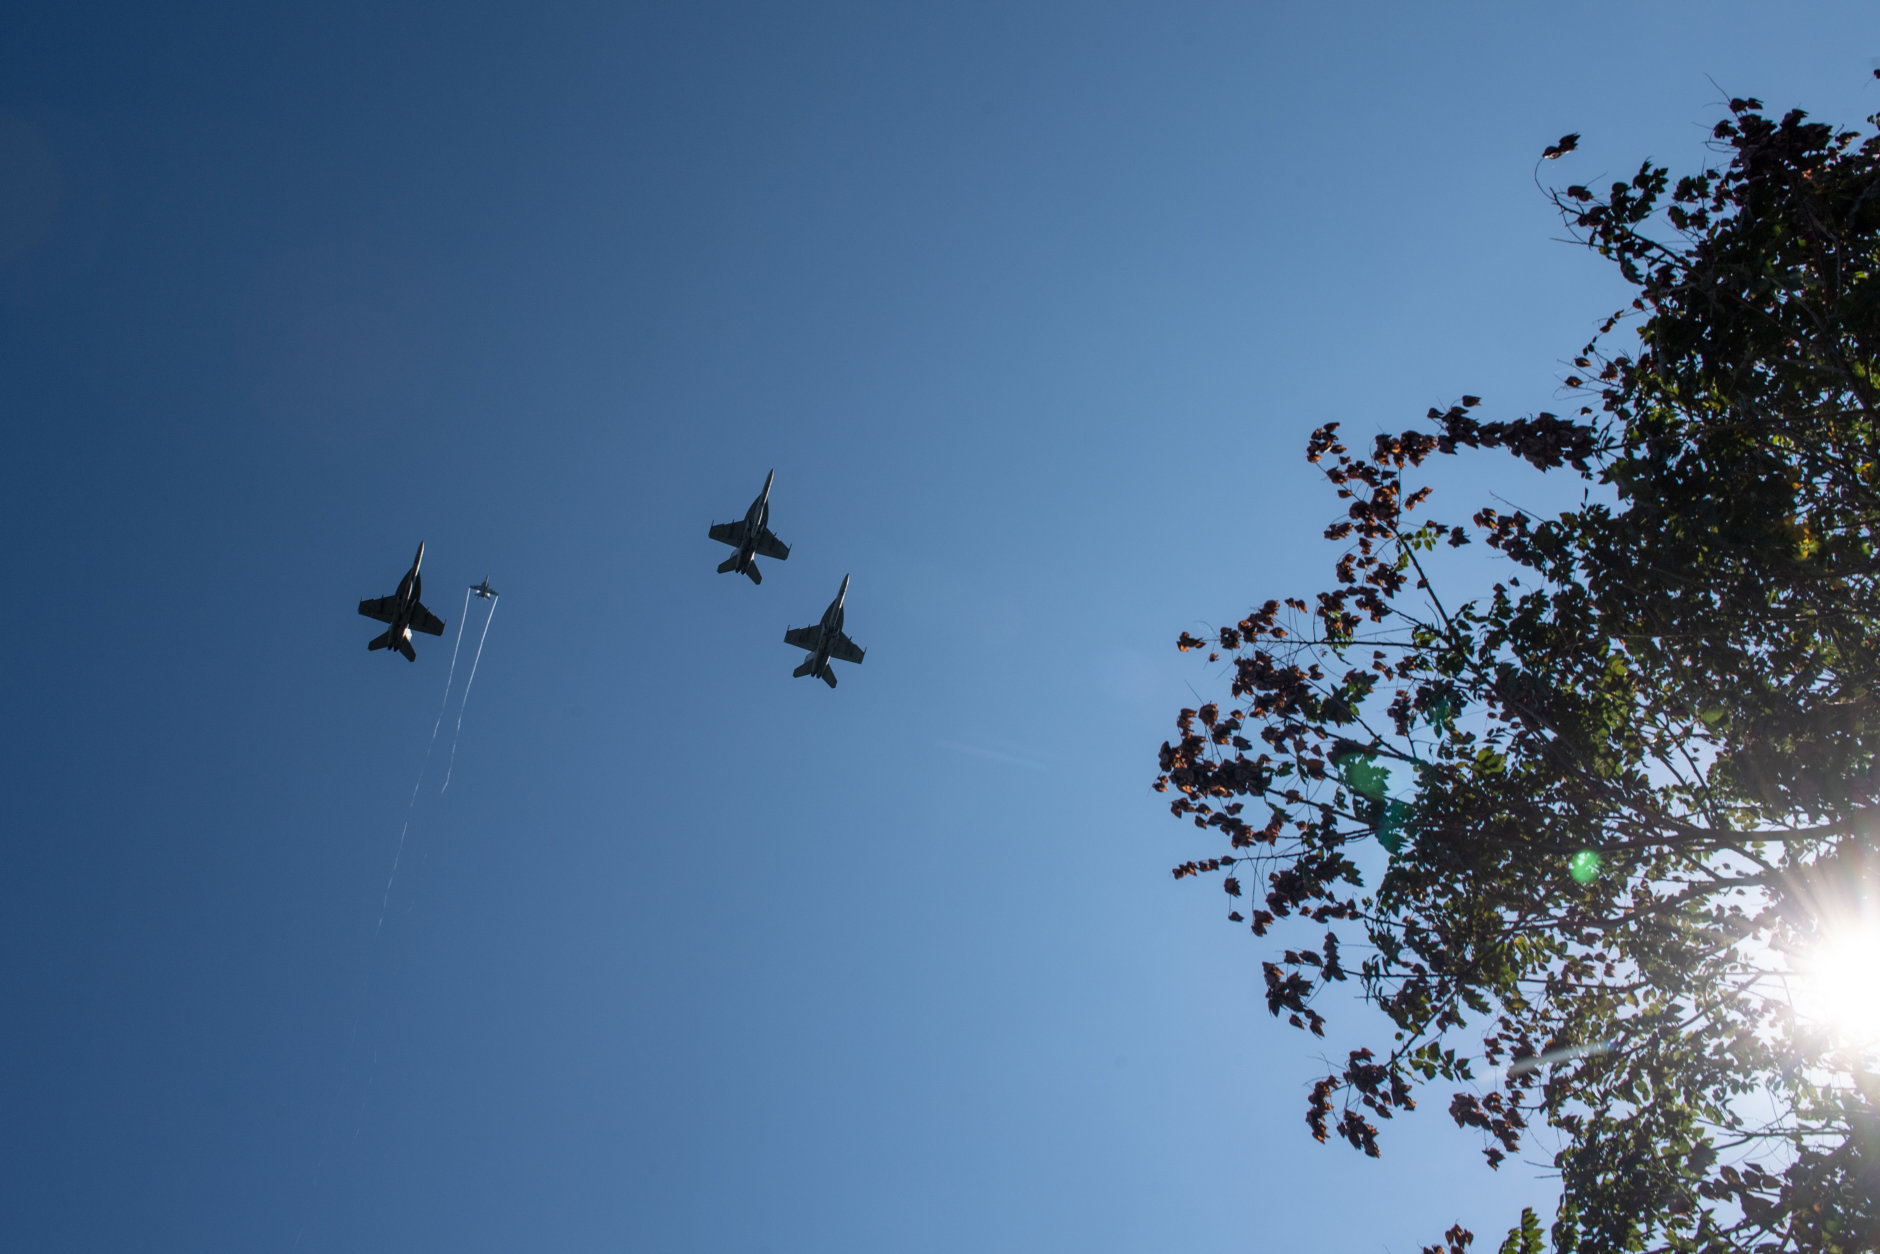 F/A-18 Super Hornets from Strike Fighter Squadrons (VFA) 31, VFA-32, VFA-87 and VFA-105 honor the late Sen. John McCain with a fly-over of the United States Naval Academy during his burial service, Sept. 2, 2018. The aircraft were in missing man formation, which consists of four aircraft in a formation shape of a "V" with the right arm, from the pilots' perspective, longer than the left. When the "V" passes over the ceremonial site, the aircraft in the "ring-finger" position pulls up and leaves the formation to signify a lost comrade in arms. U.S. Navy photo by Mass Communication Specialist 2nd Class Nathan Burke. (Courtesy U.S. Naval Academy Public Affairs)